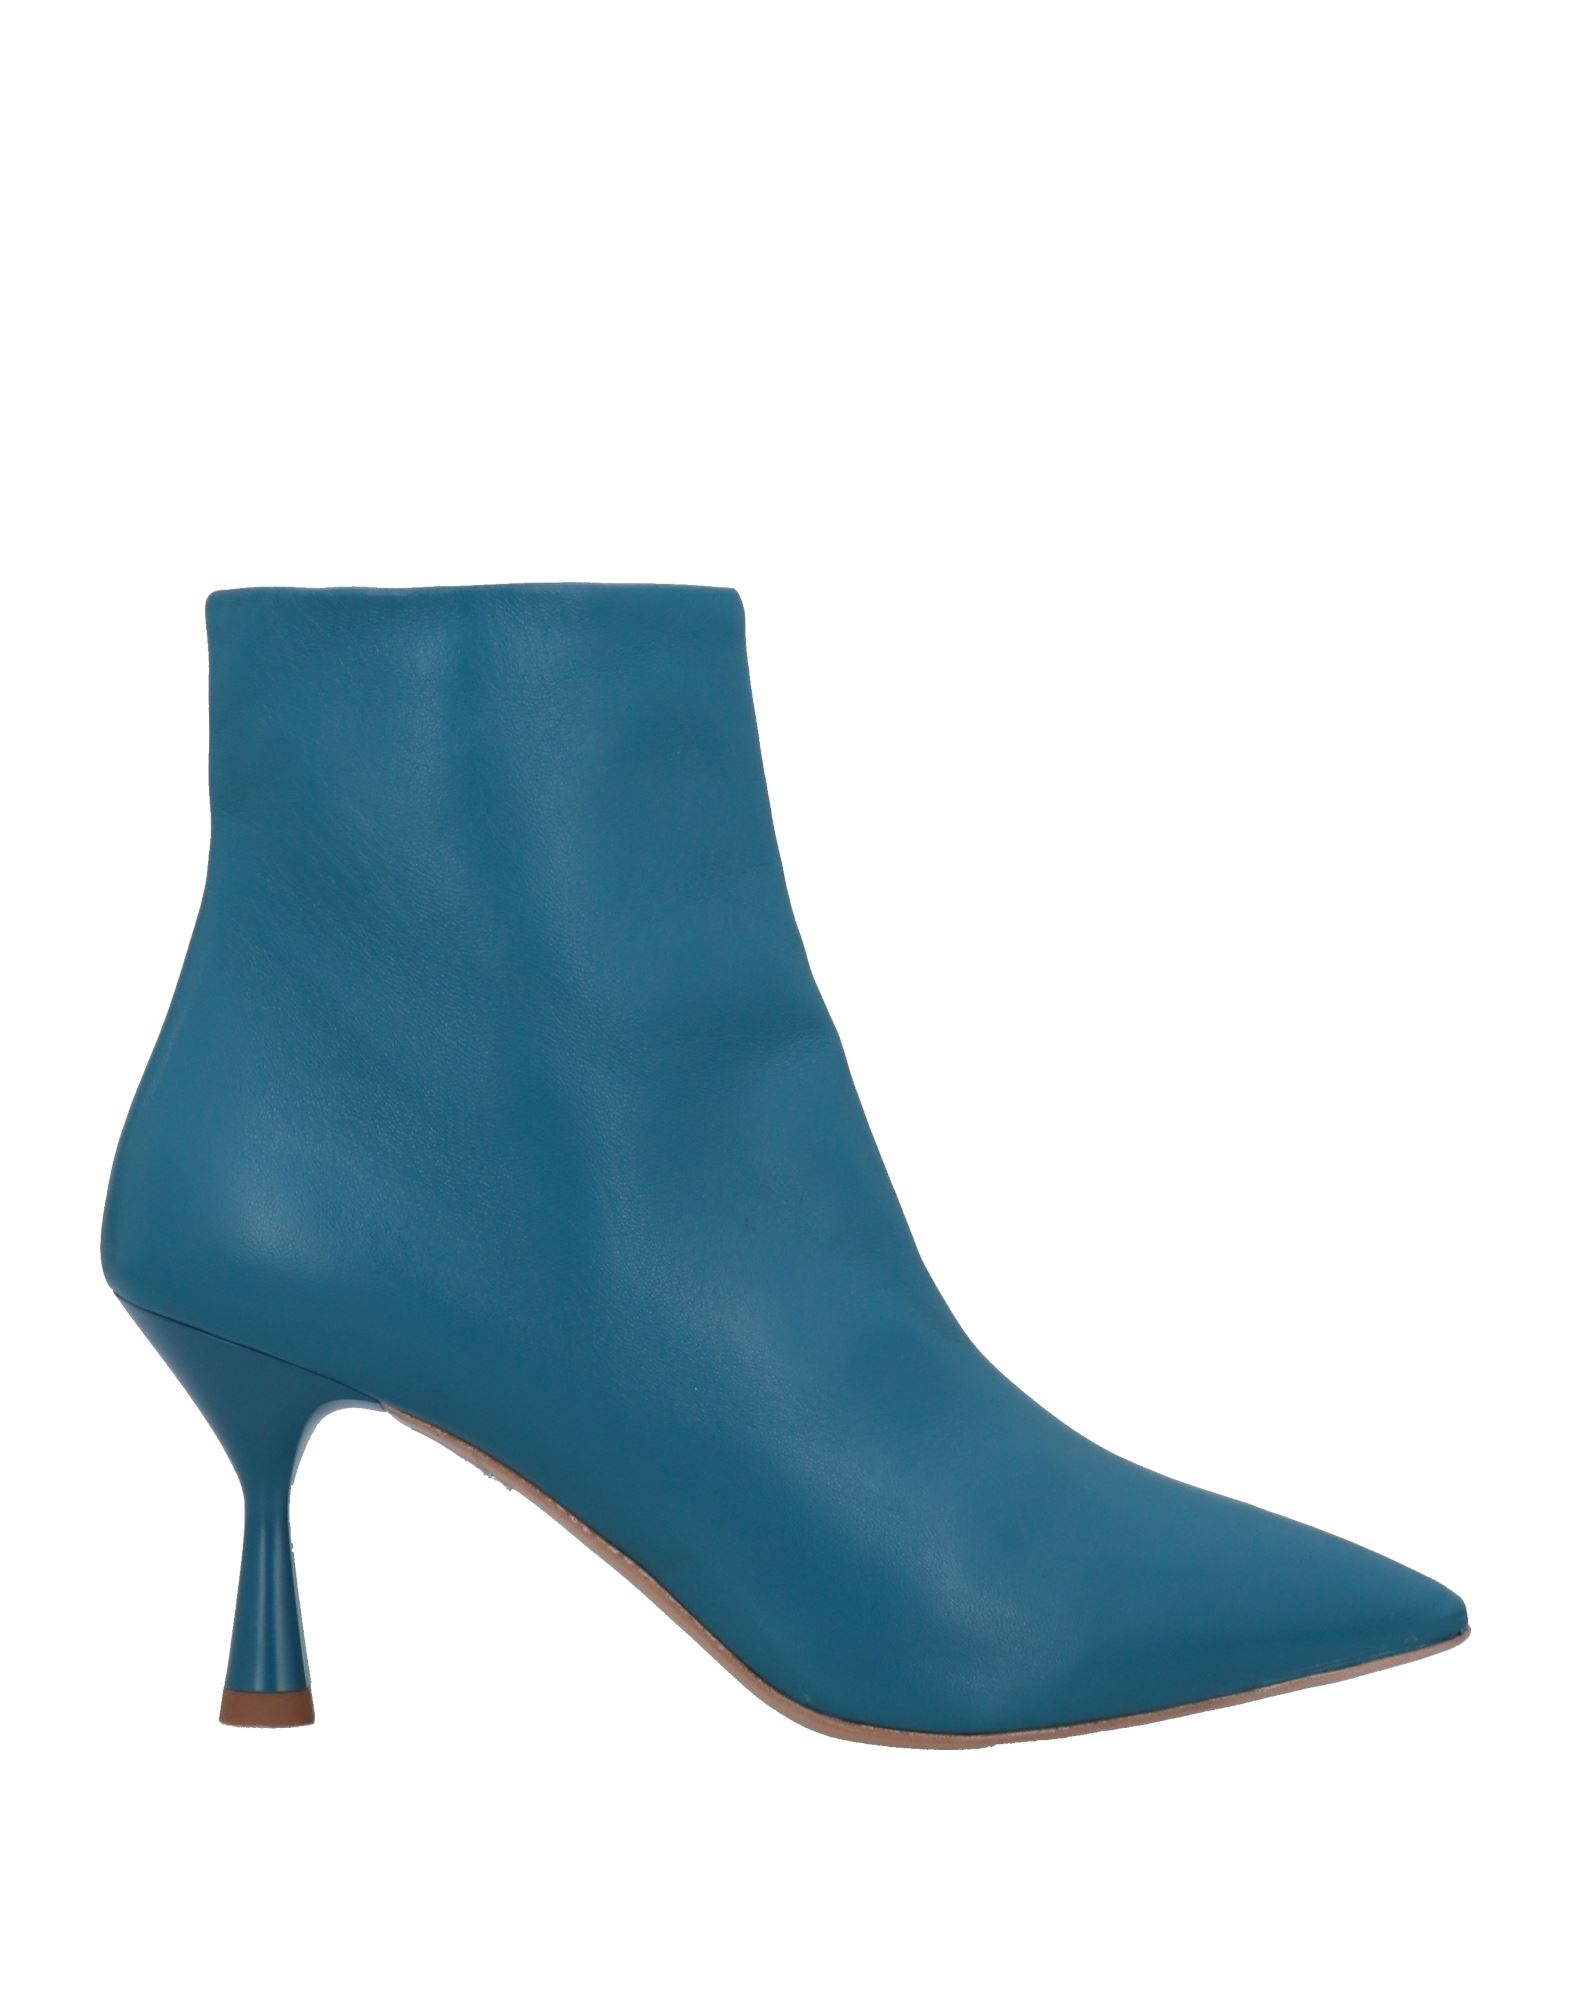 Islo Isabella Lorusso Ankle Boots In Green